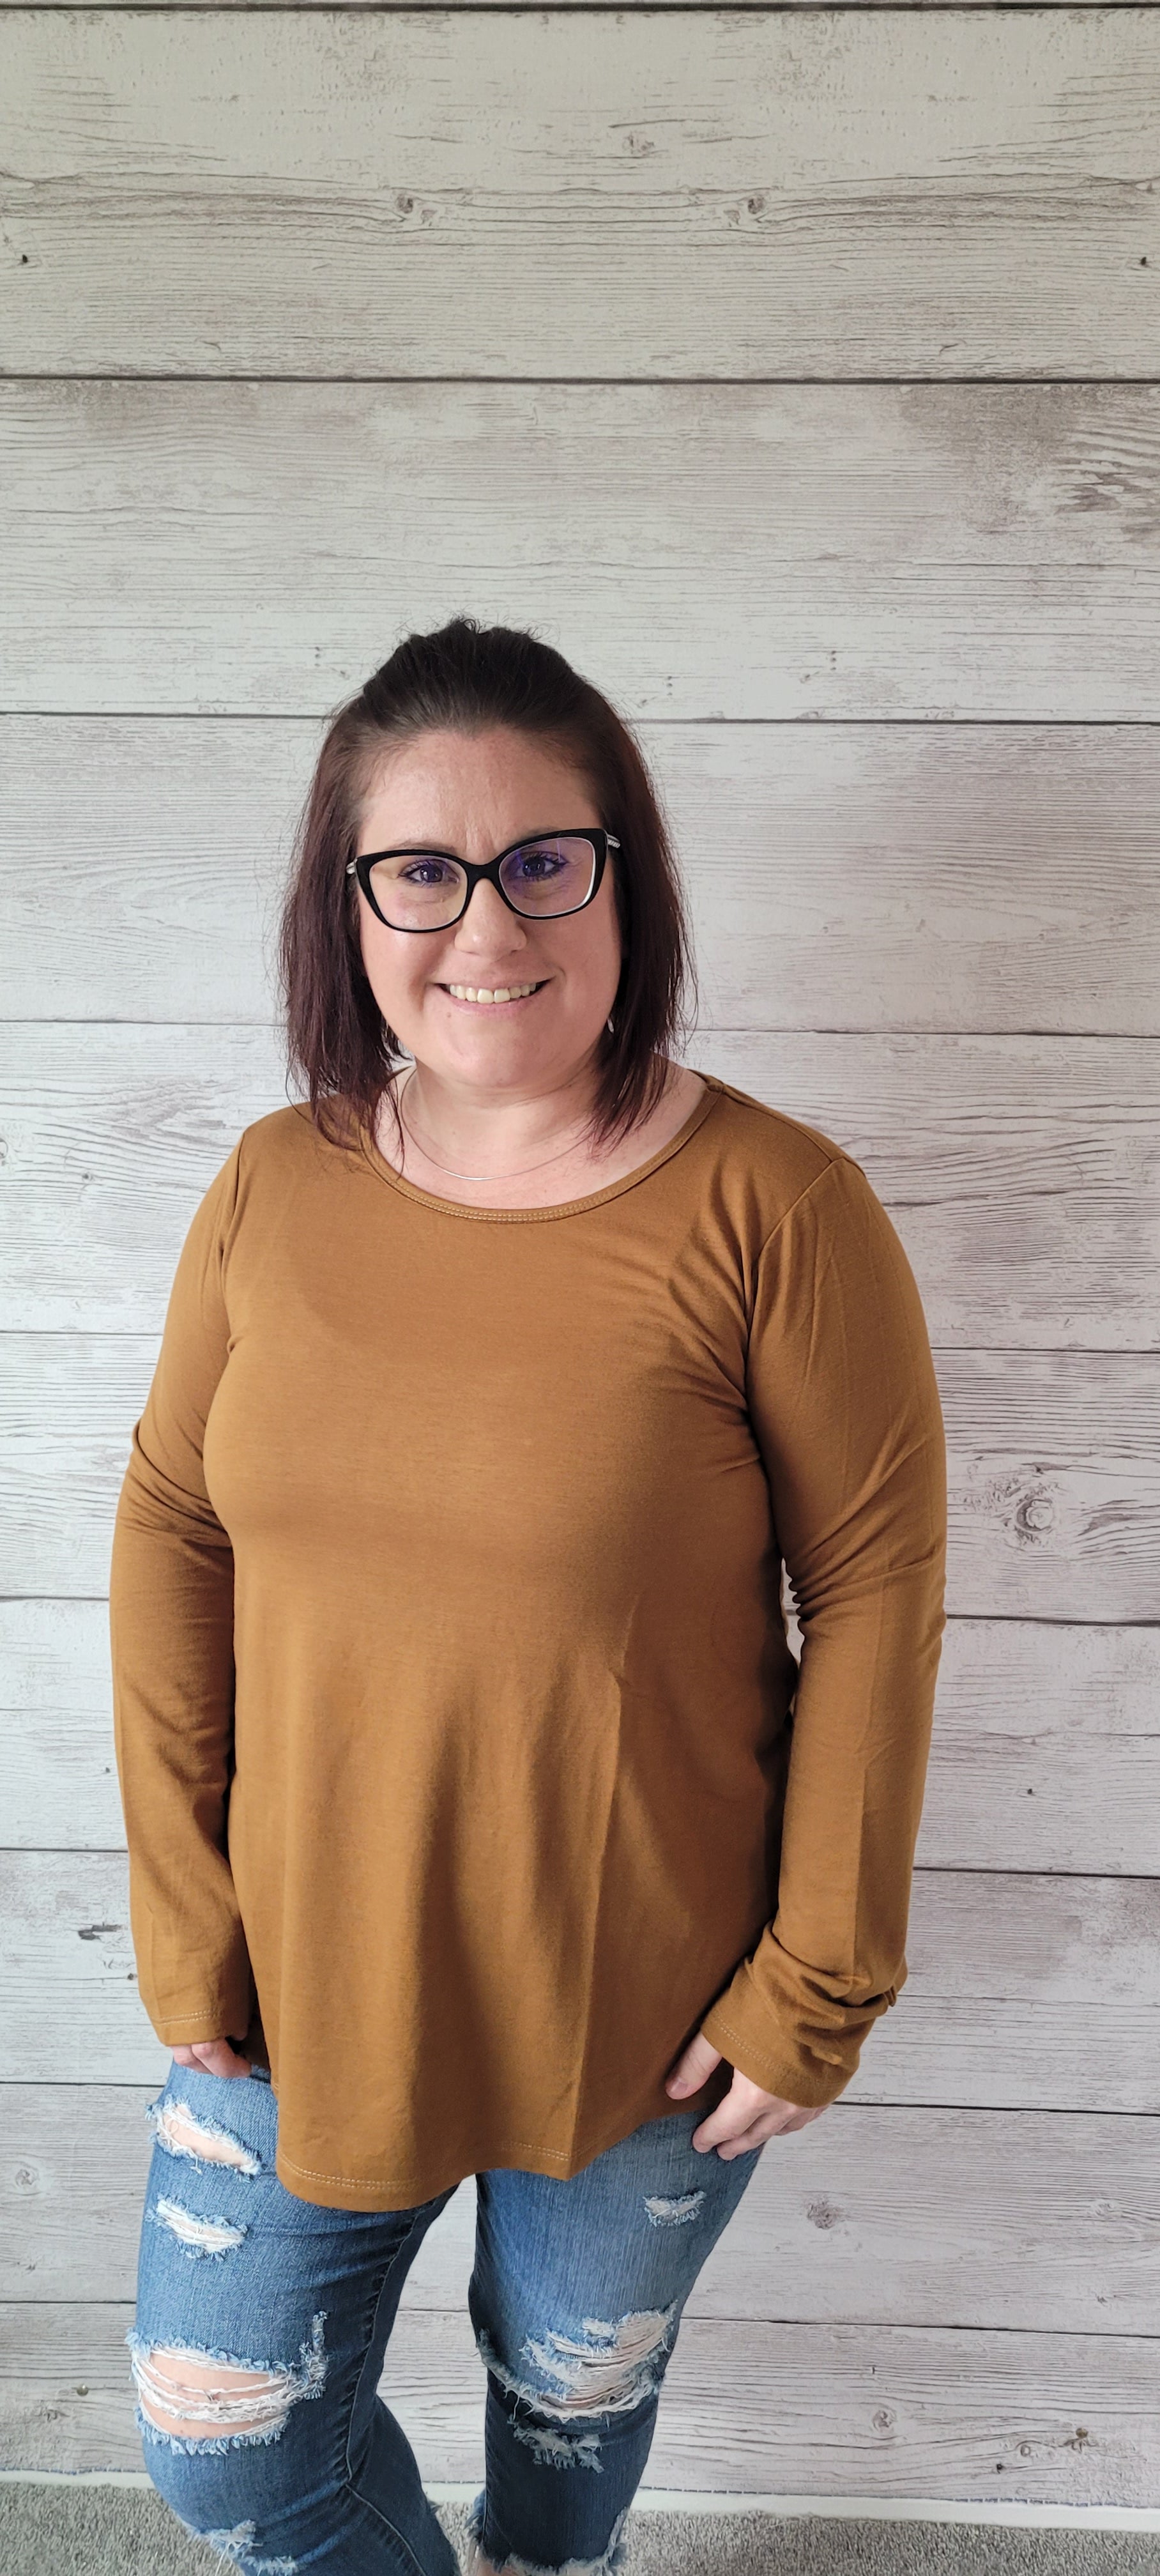 Ready for layering in style? Look no further than our Olivia French Terry Camel Top! With its cute scoop neckline and rounded hemline, you'll be looking cozy and chic all season long. Perfect for adding pizzazz to any outfit, this hip top will keep you comfy and stylish! Sizes small through large.